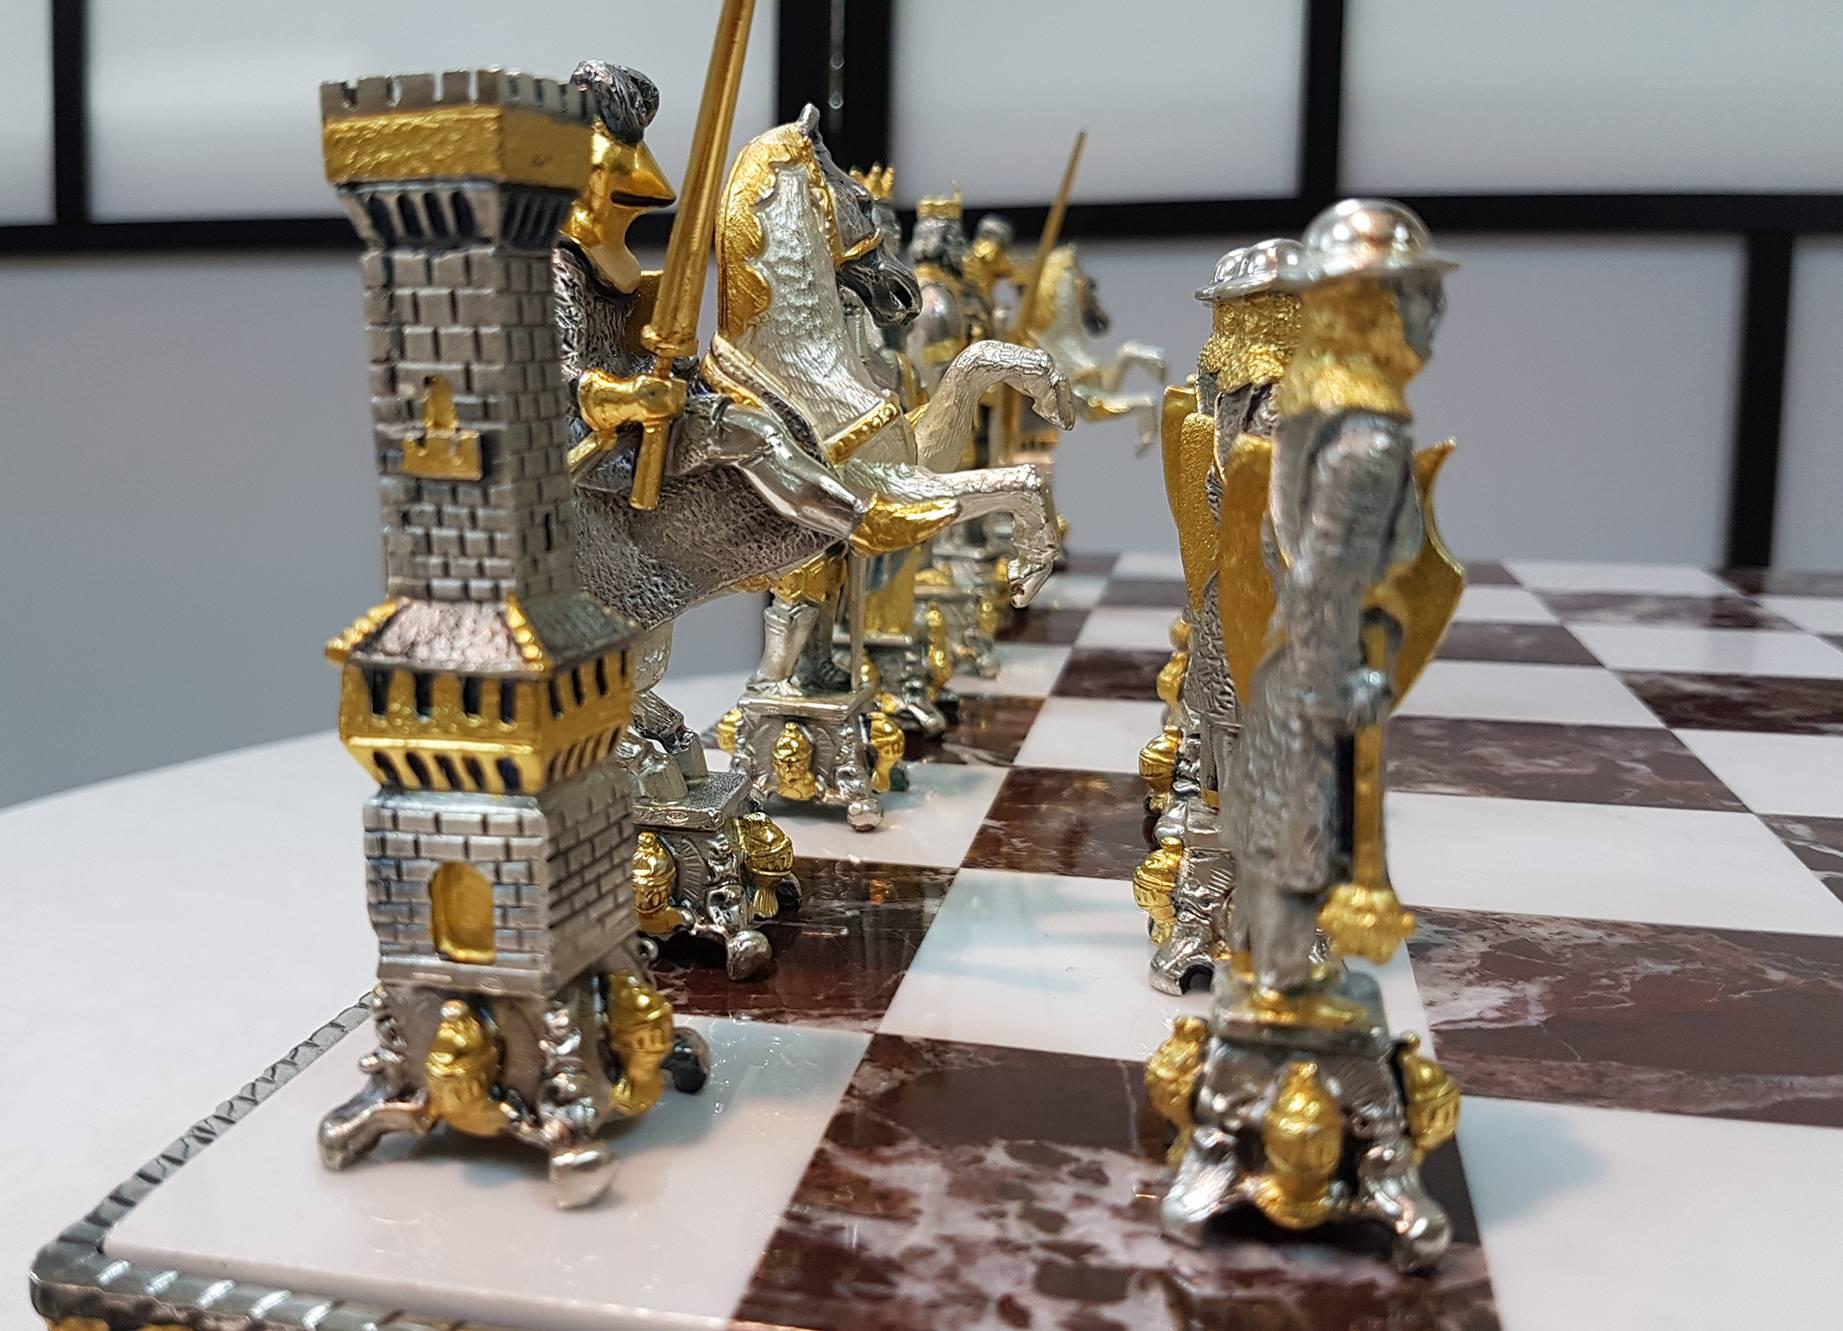 Gilt 20th Century Italian Sterling Silver Chess Board and Chess Game. Made in Italy